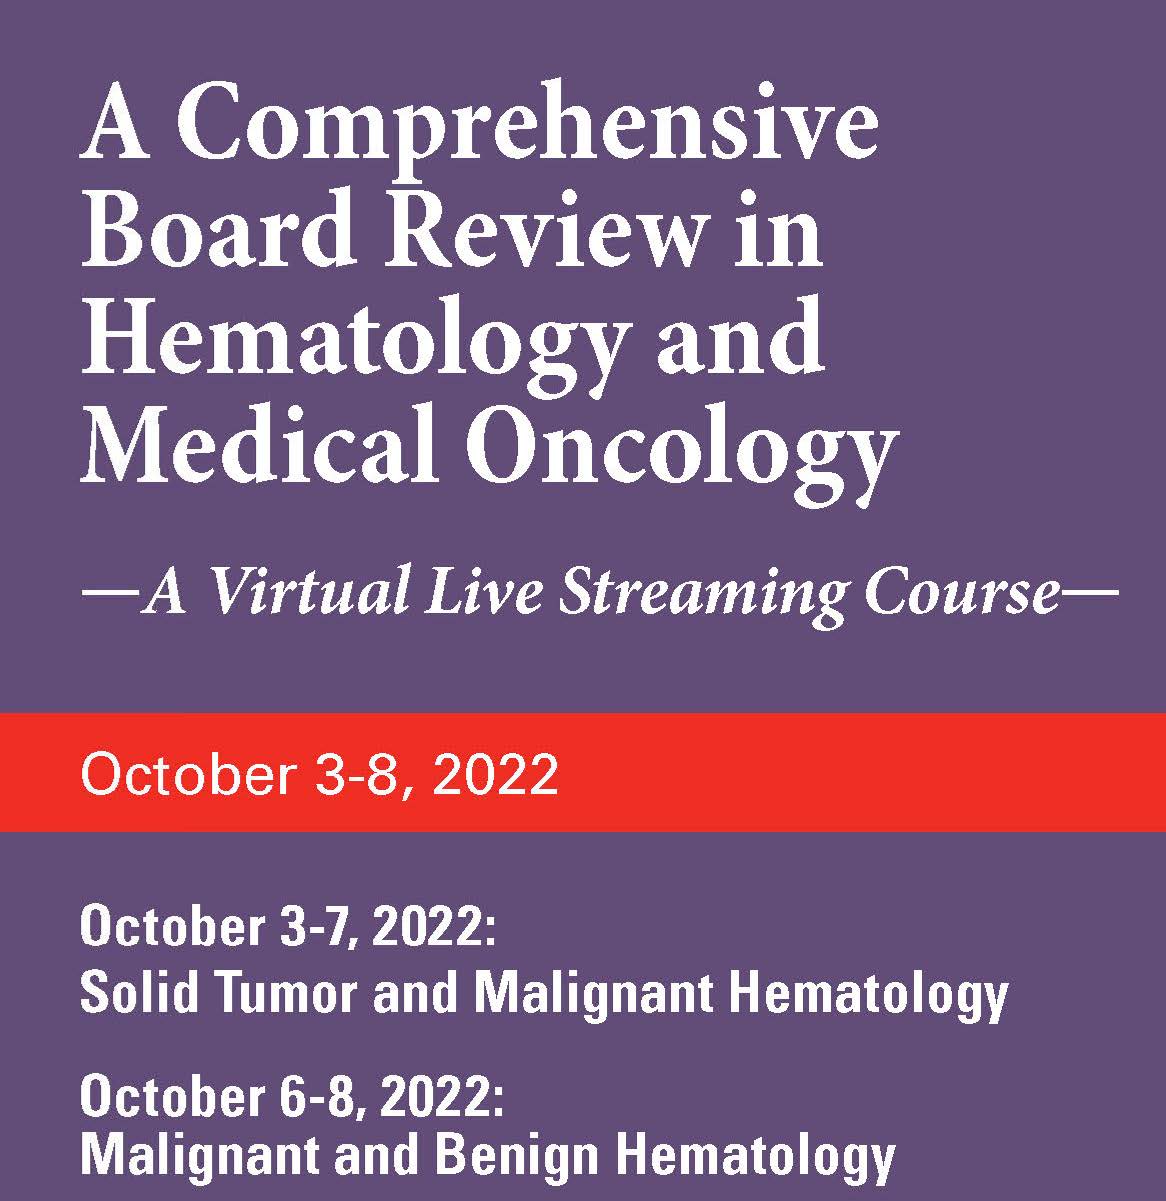 The 2023 MD Anderson Cancer Center/Baylor College of Medicine Hematology and Medical Oncology Board Review Materials Only - NOT CONFERENCE REGISTRATION Banner